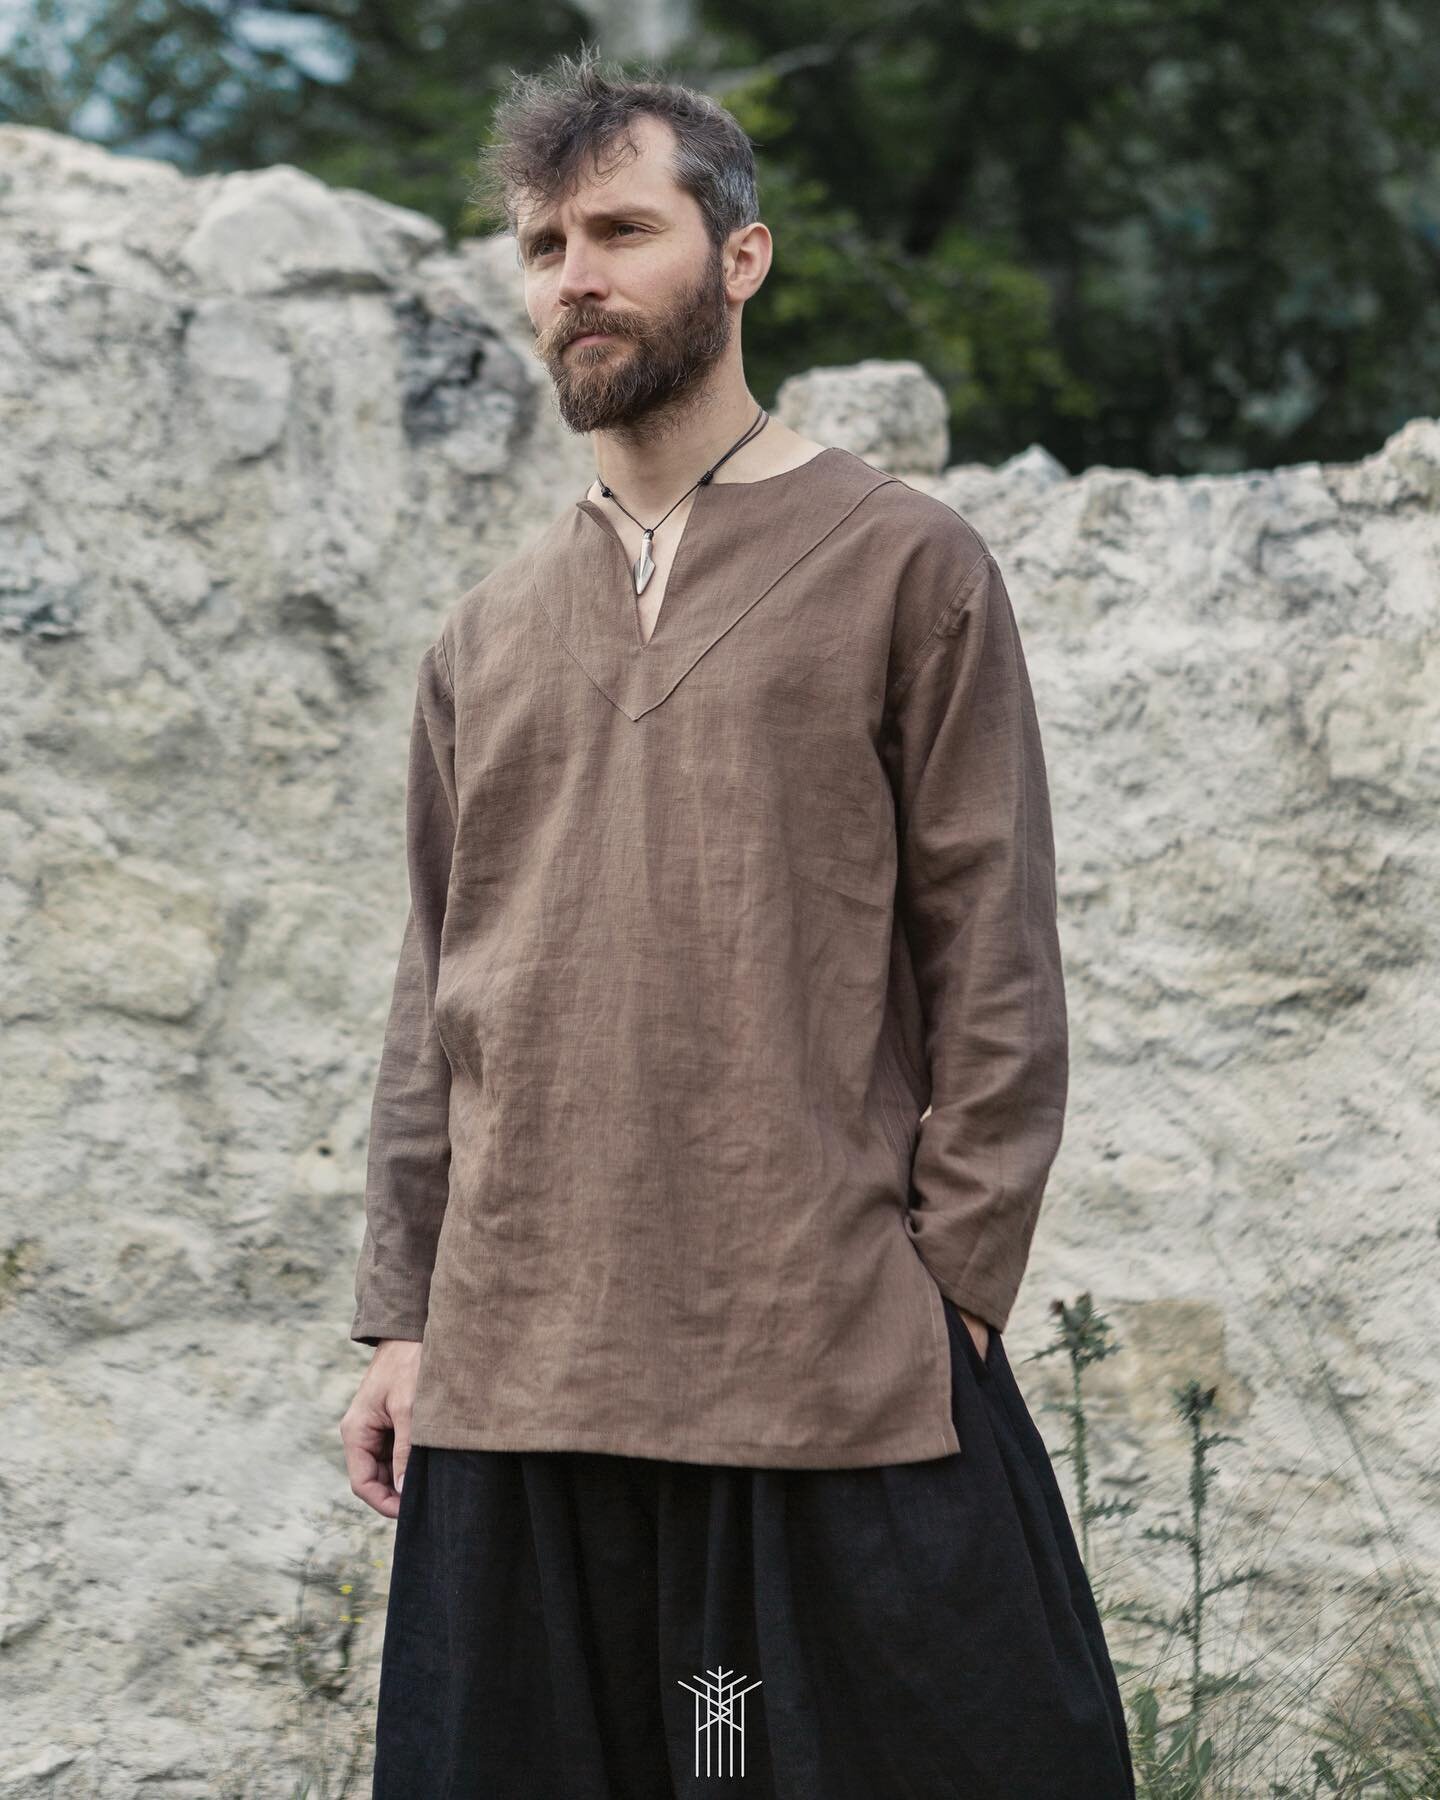 Medieval linen tunic

The pattern of this tunic may look simple, yet it is very detailed and elegant. The front and back part are identical except for the collar and lenght. The sleeves are made from one piece and all seams are beautifully executed t